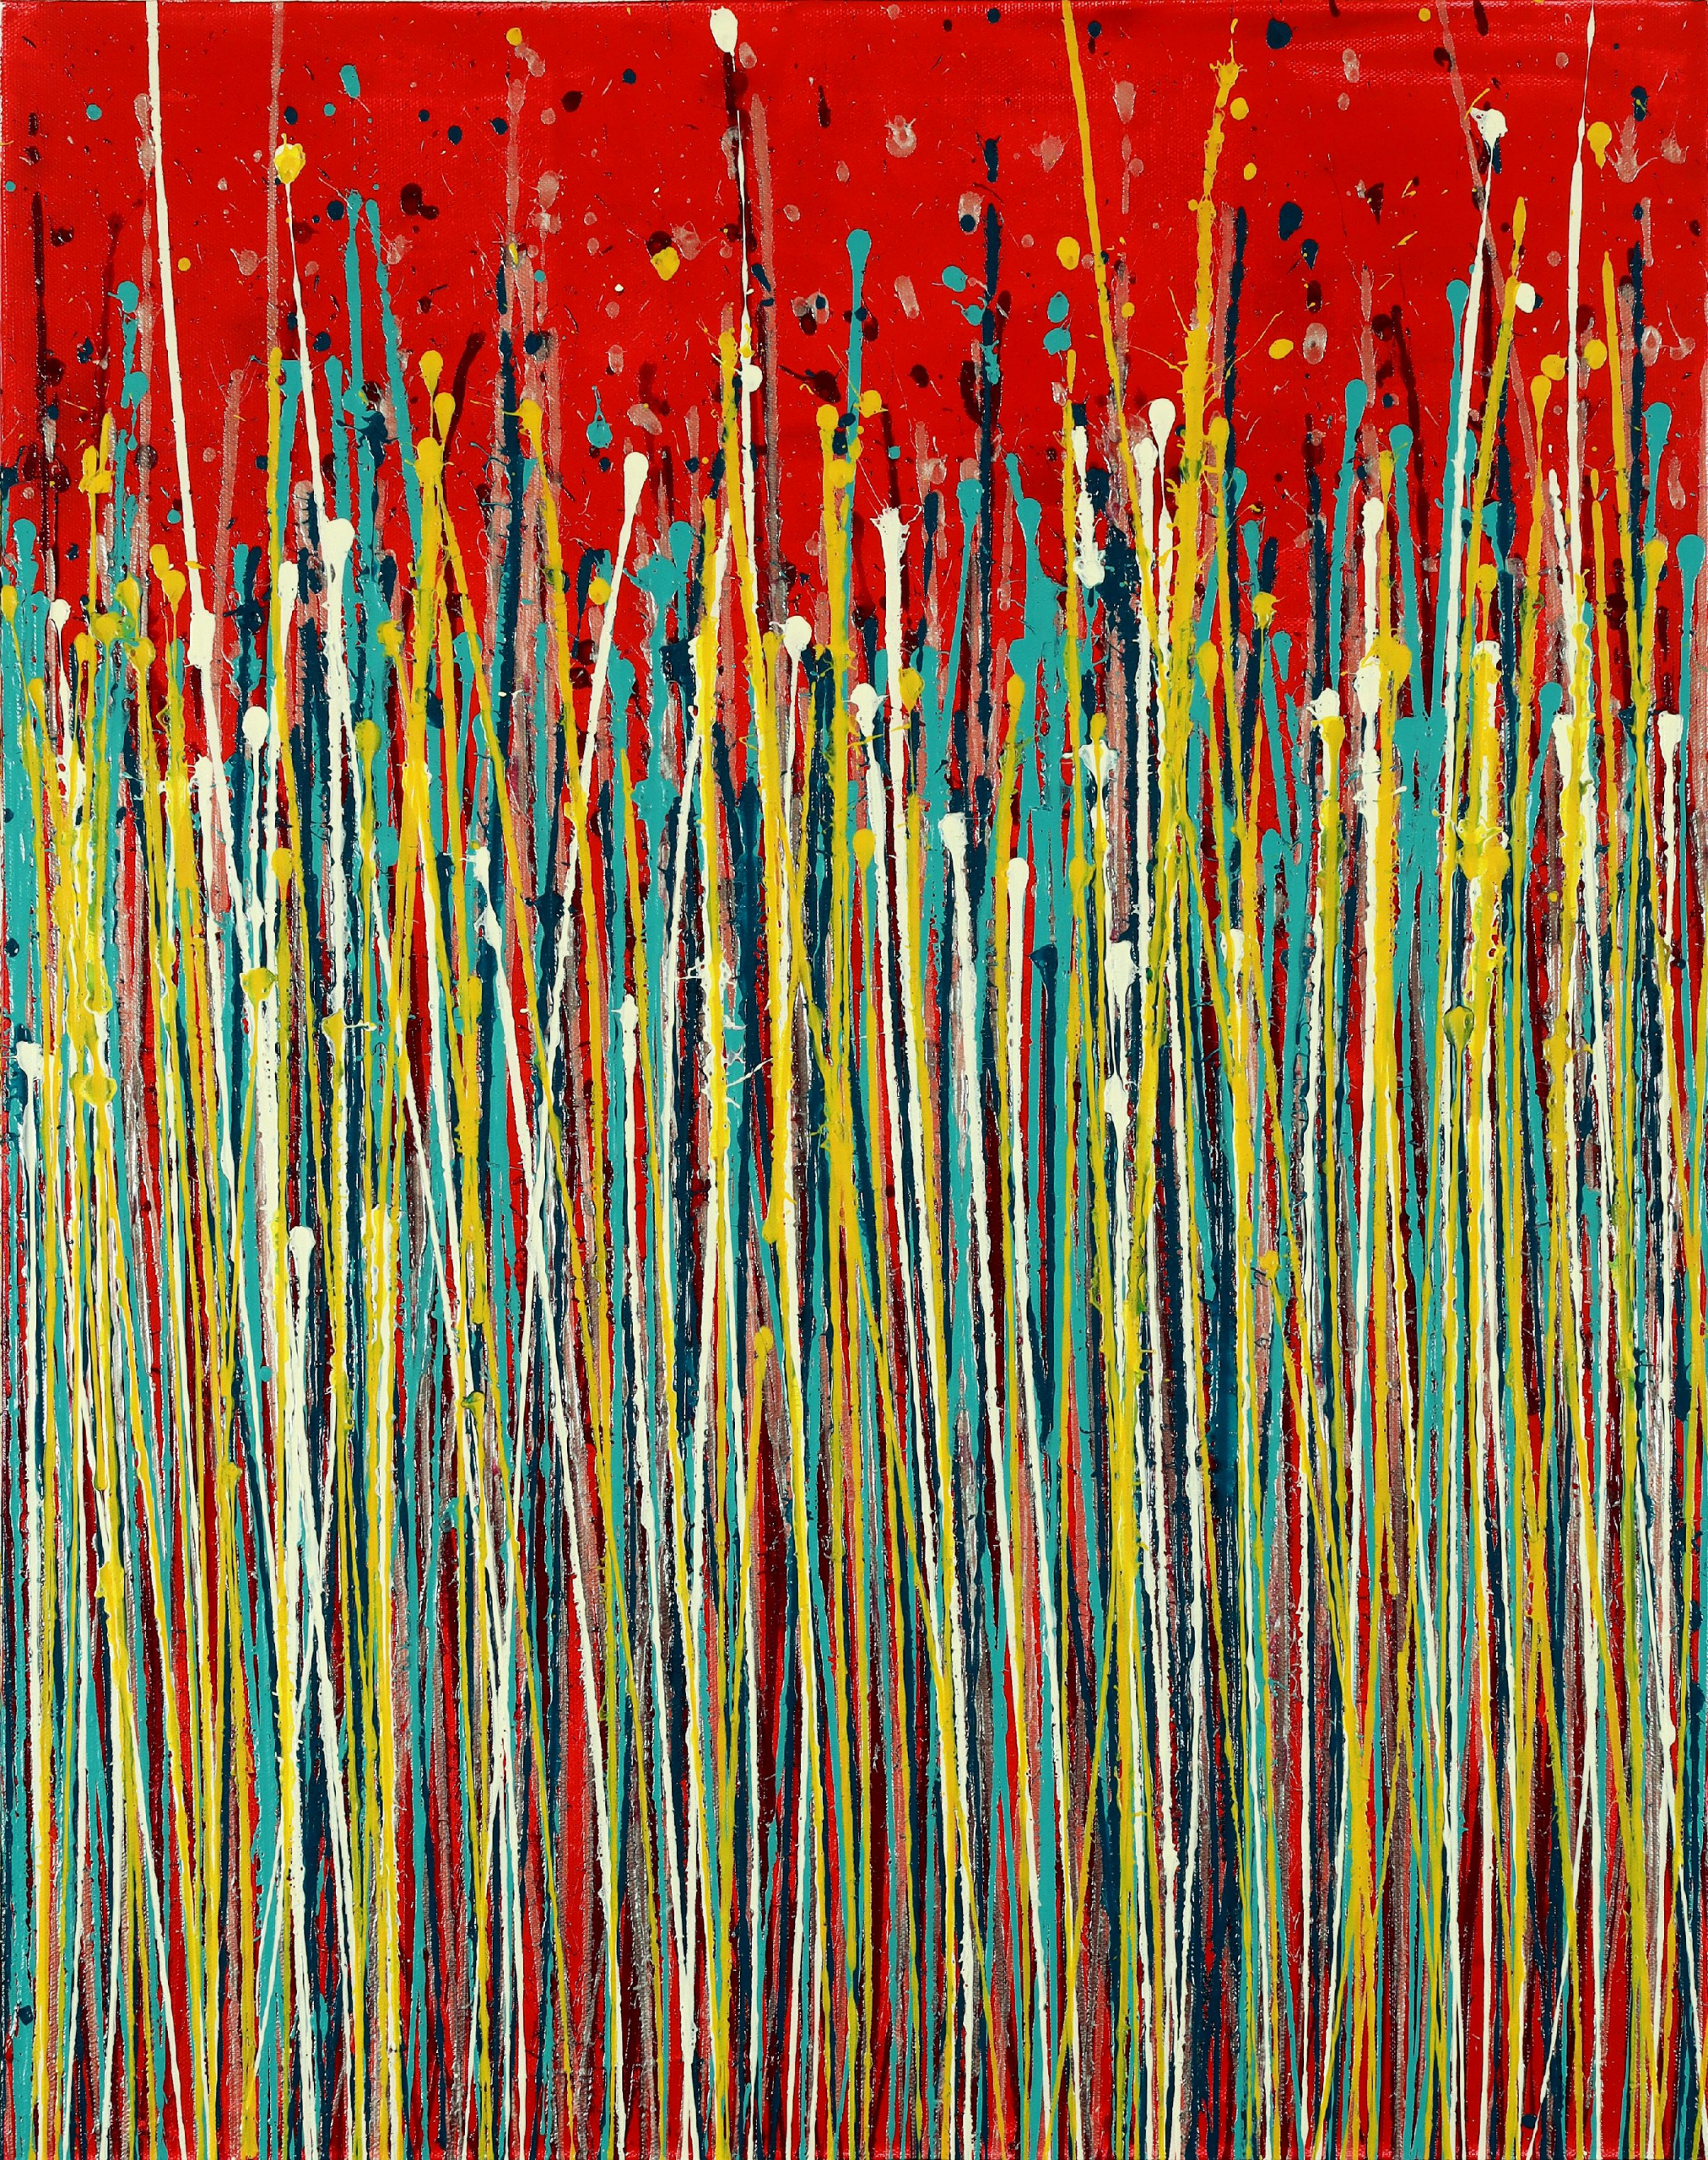 Strange Spectra 6 (over red) (2022) / Triptych / CANVAS 2 OF 3